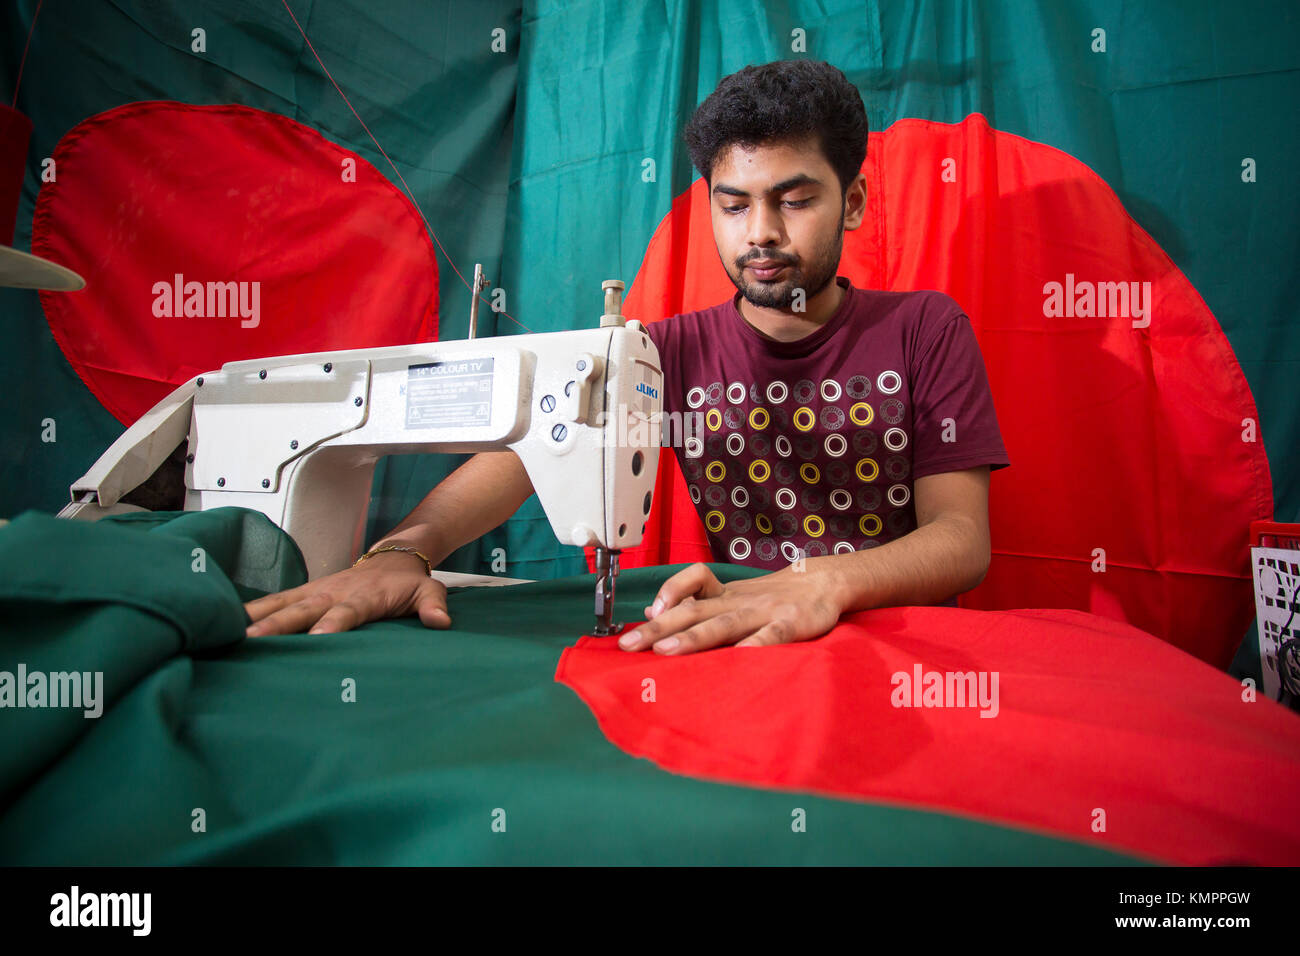 Dhaka, Bangladesh. 09th Dec, 2017. Victory day is a national holiday in Bangladesh celebrated on December 16 to commemorate the victory of the Allied forces High Command over the Pakistani forces in the Bangladesh Liberation War in 1971. A young tailor sewing cloth and making Bangladeshi national flags for selling Upcoming 16 December events. Credit: Jahangir Alam Onuchcha/Alamy Live News Stock Photo